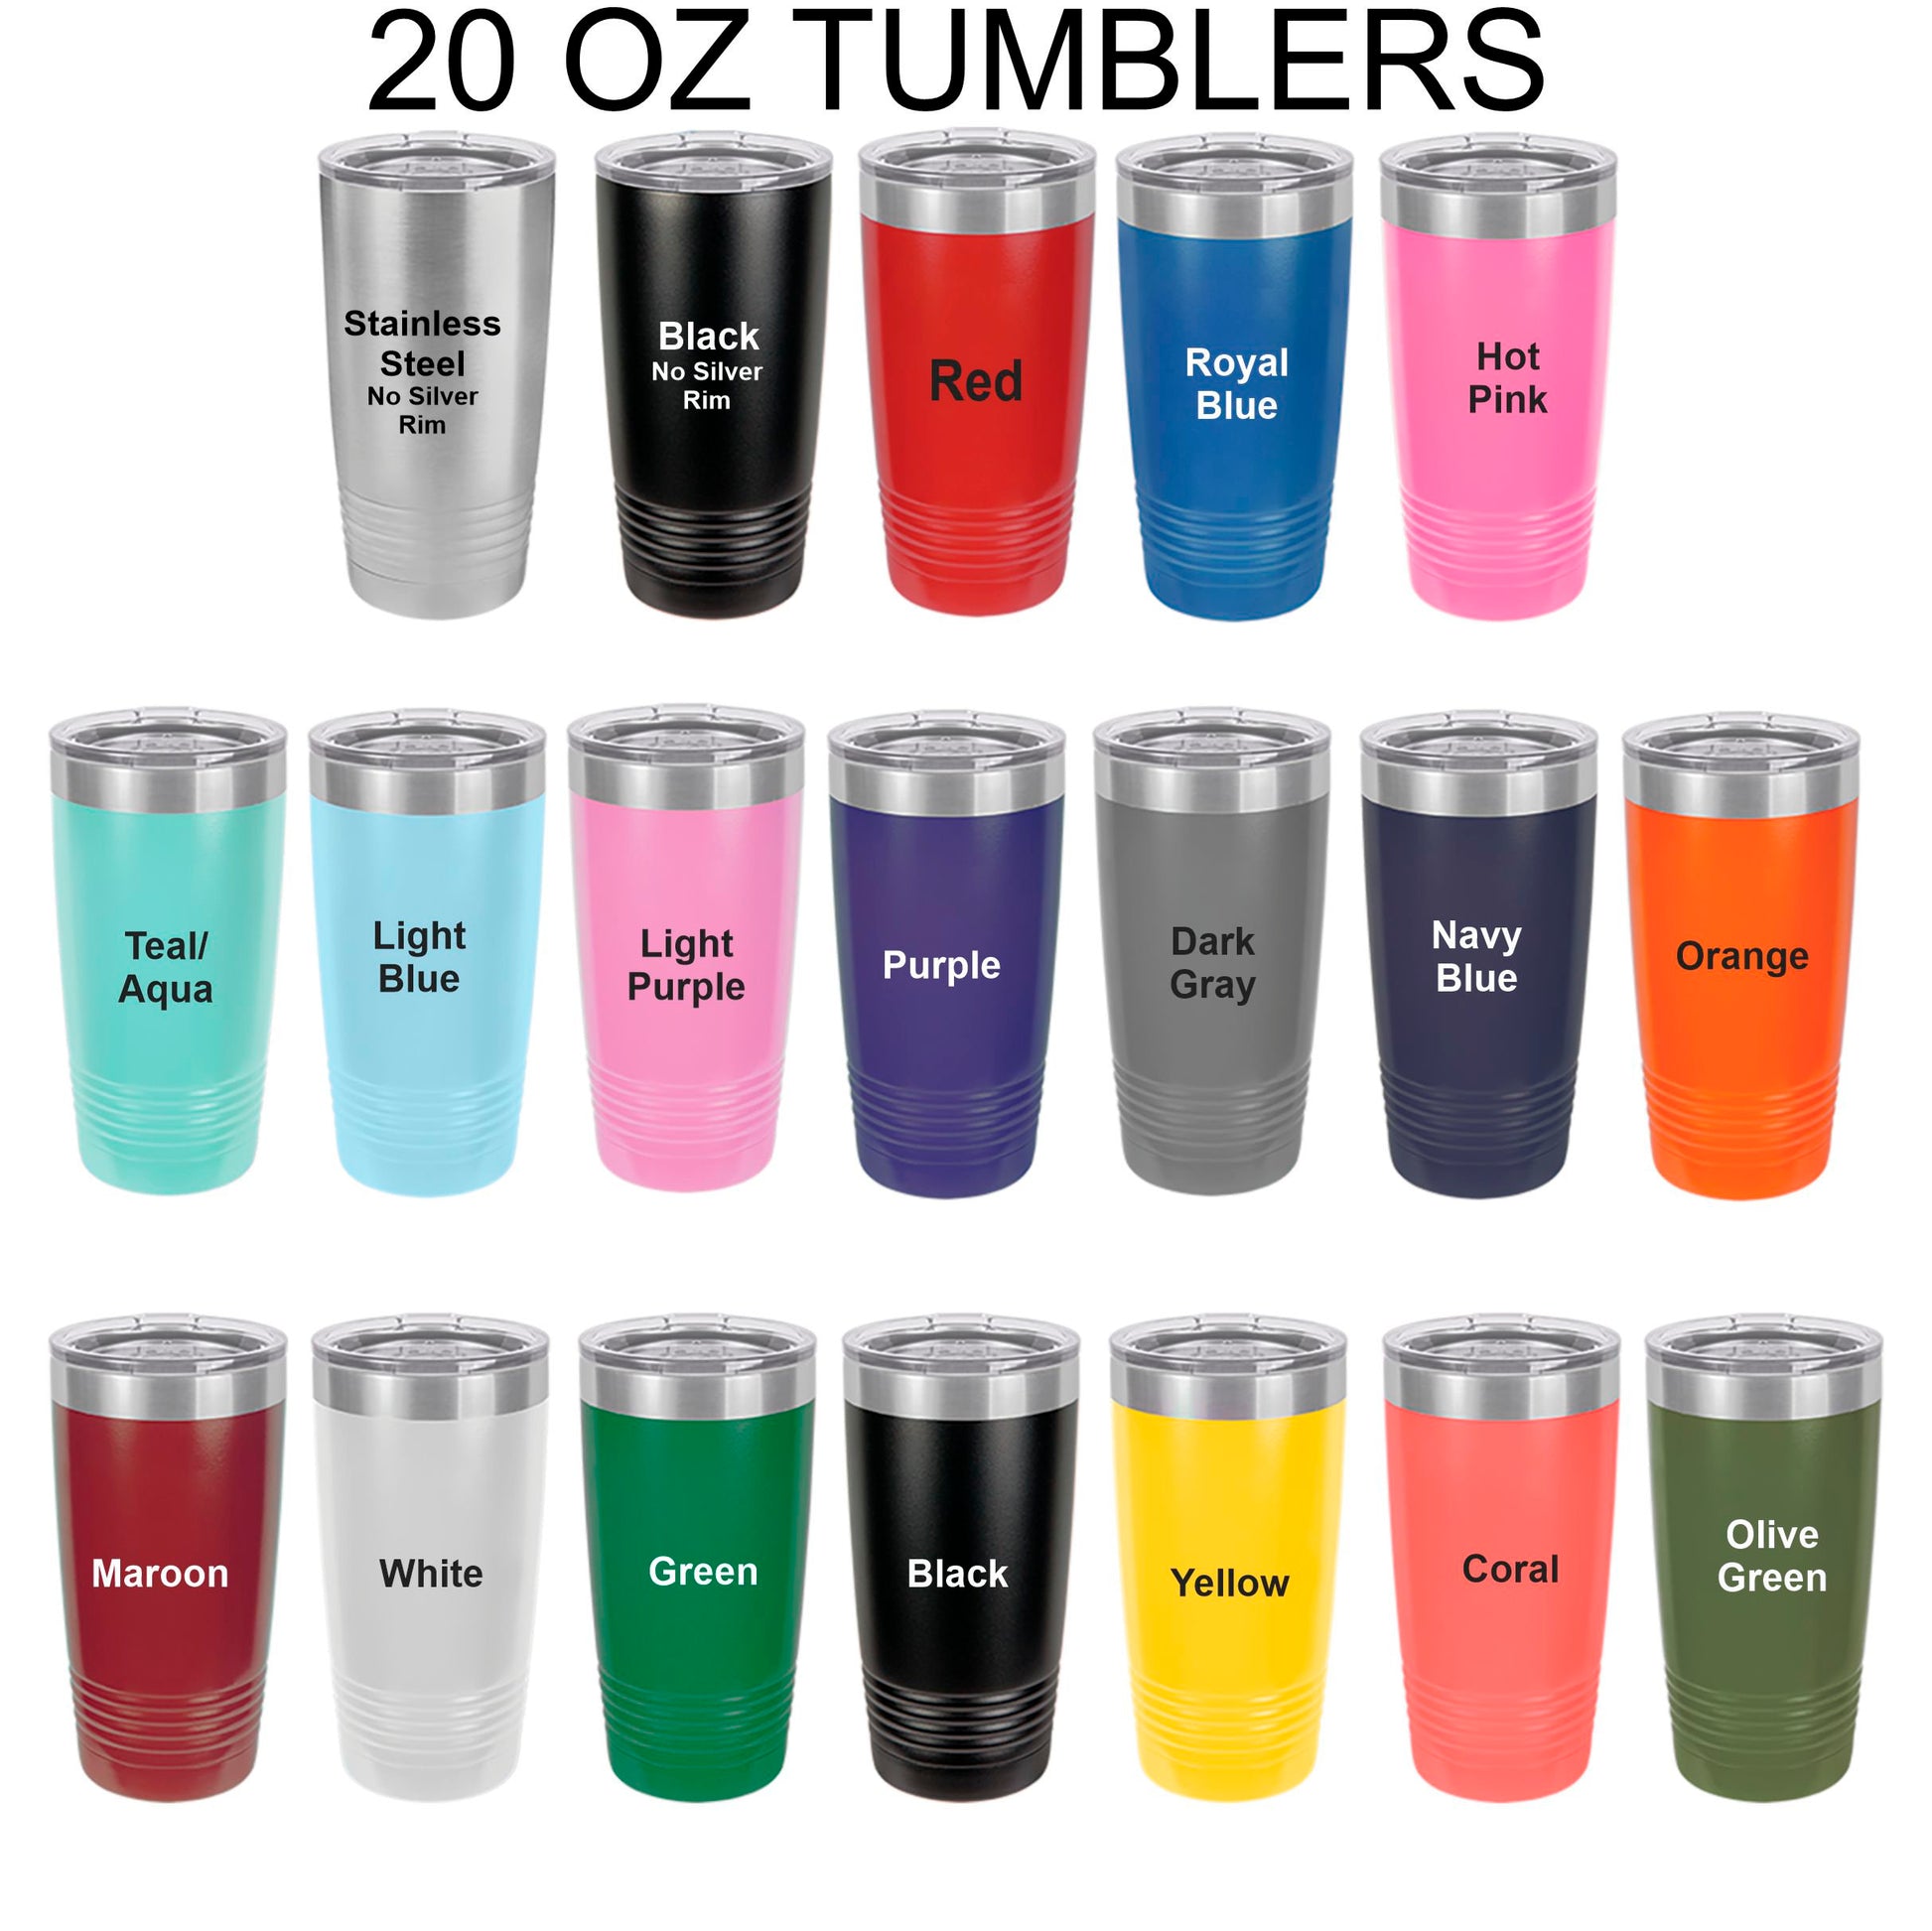 Field Hockey Coach Tumbler/ A Good Coach Can Change A Game/ Field Hockey Coach/ Engraved Both Sides/ Available Personalized/Coach Gift/20 oz